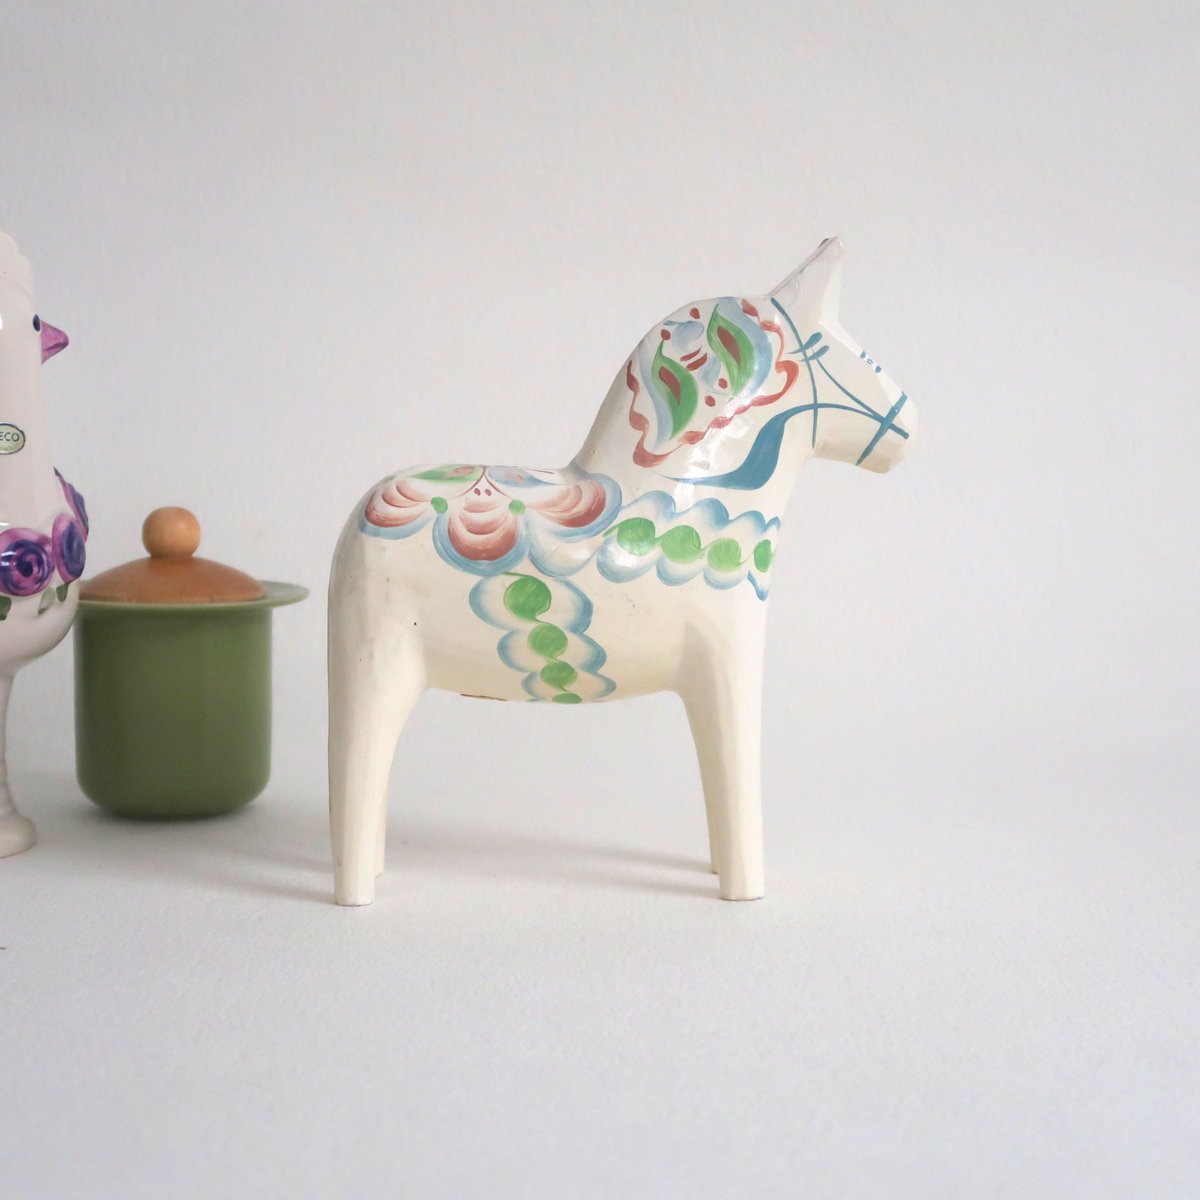 Dala horse with Pastel Kurbits Décor on Natural White, Handcrafted Wooden Dalecarlian Horse from  Sweden etsy.me/484V2Zr via @Etsy 
#dalahorse #woodenhorse #vintage